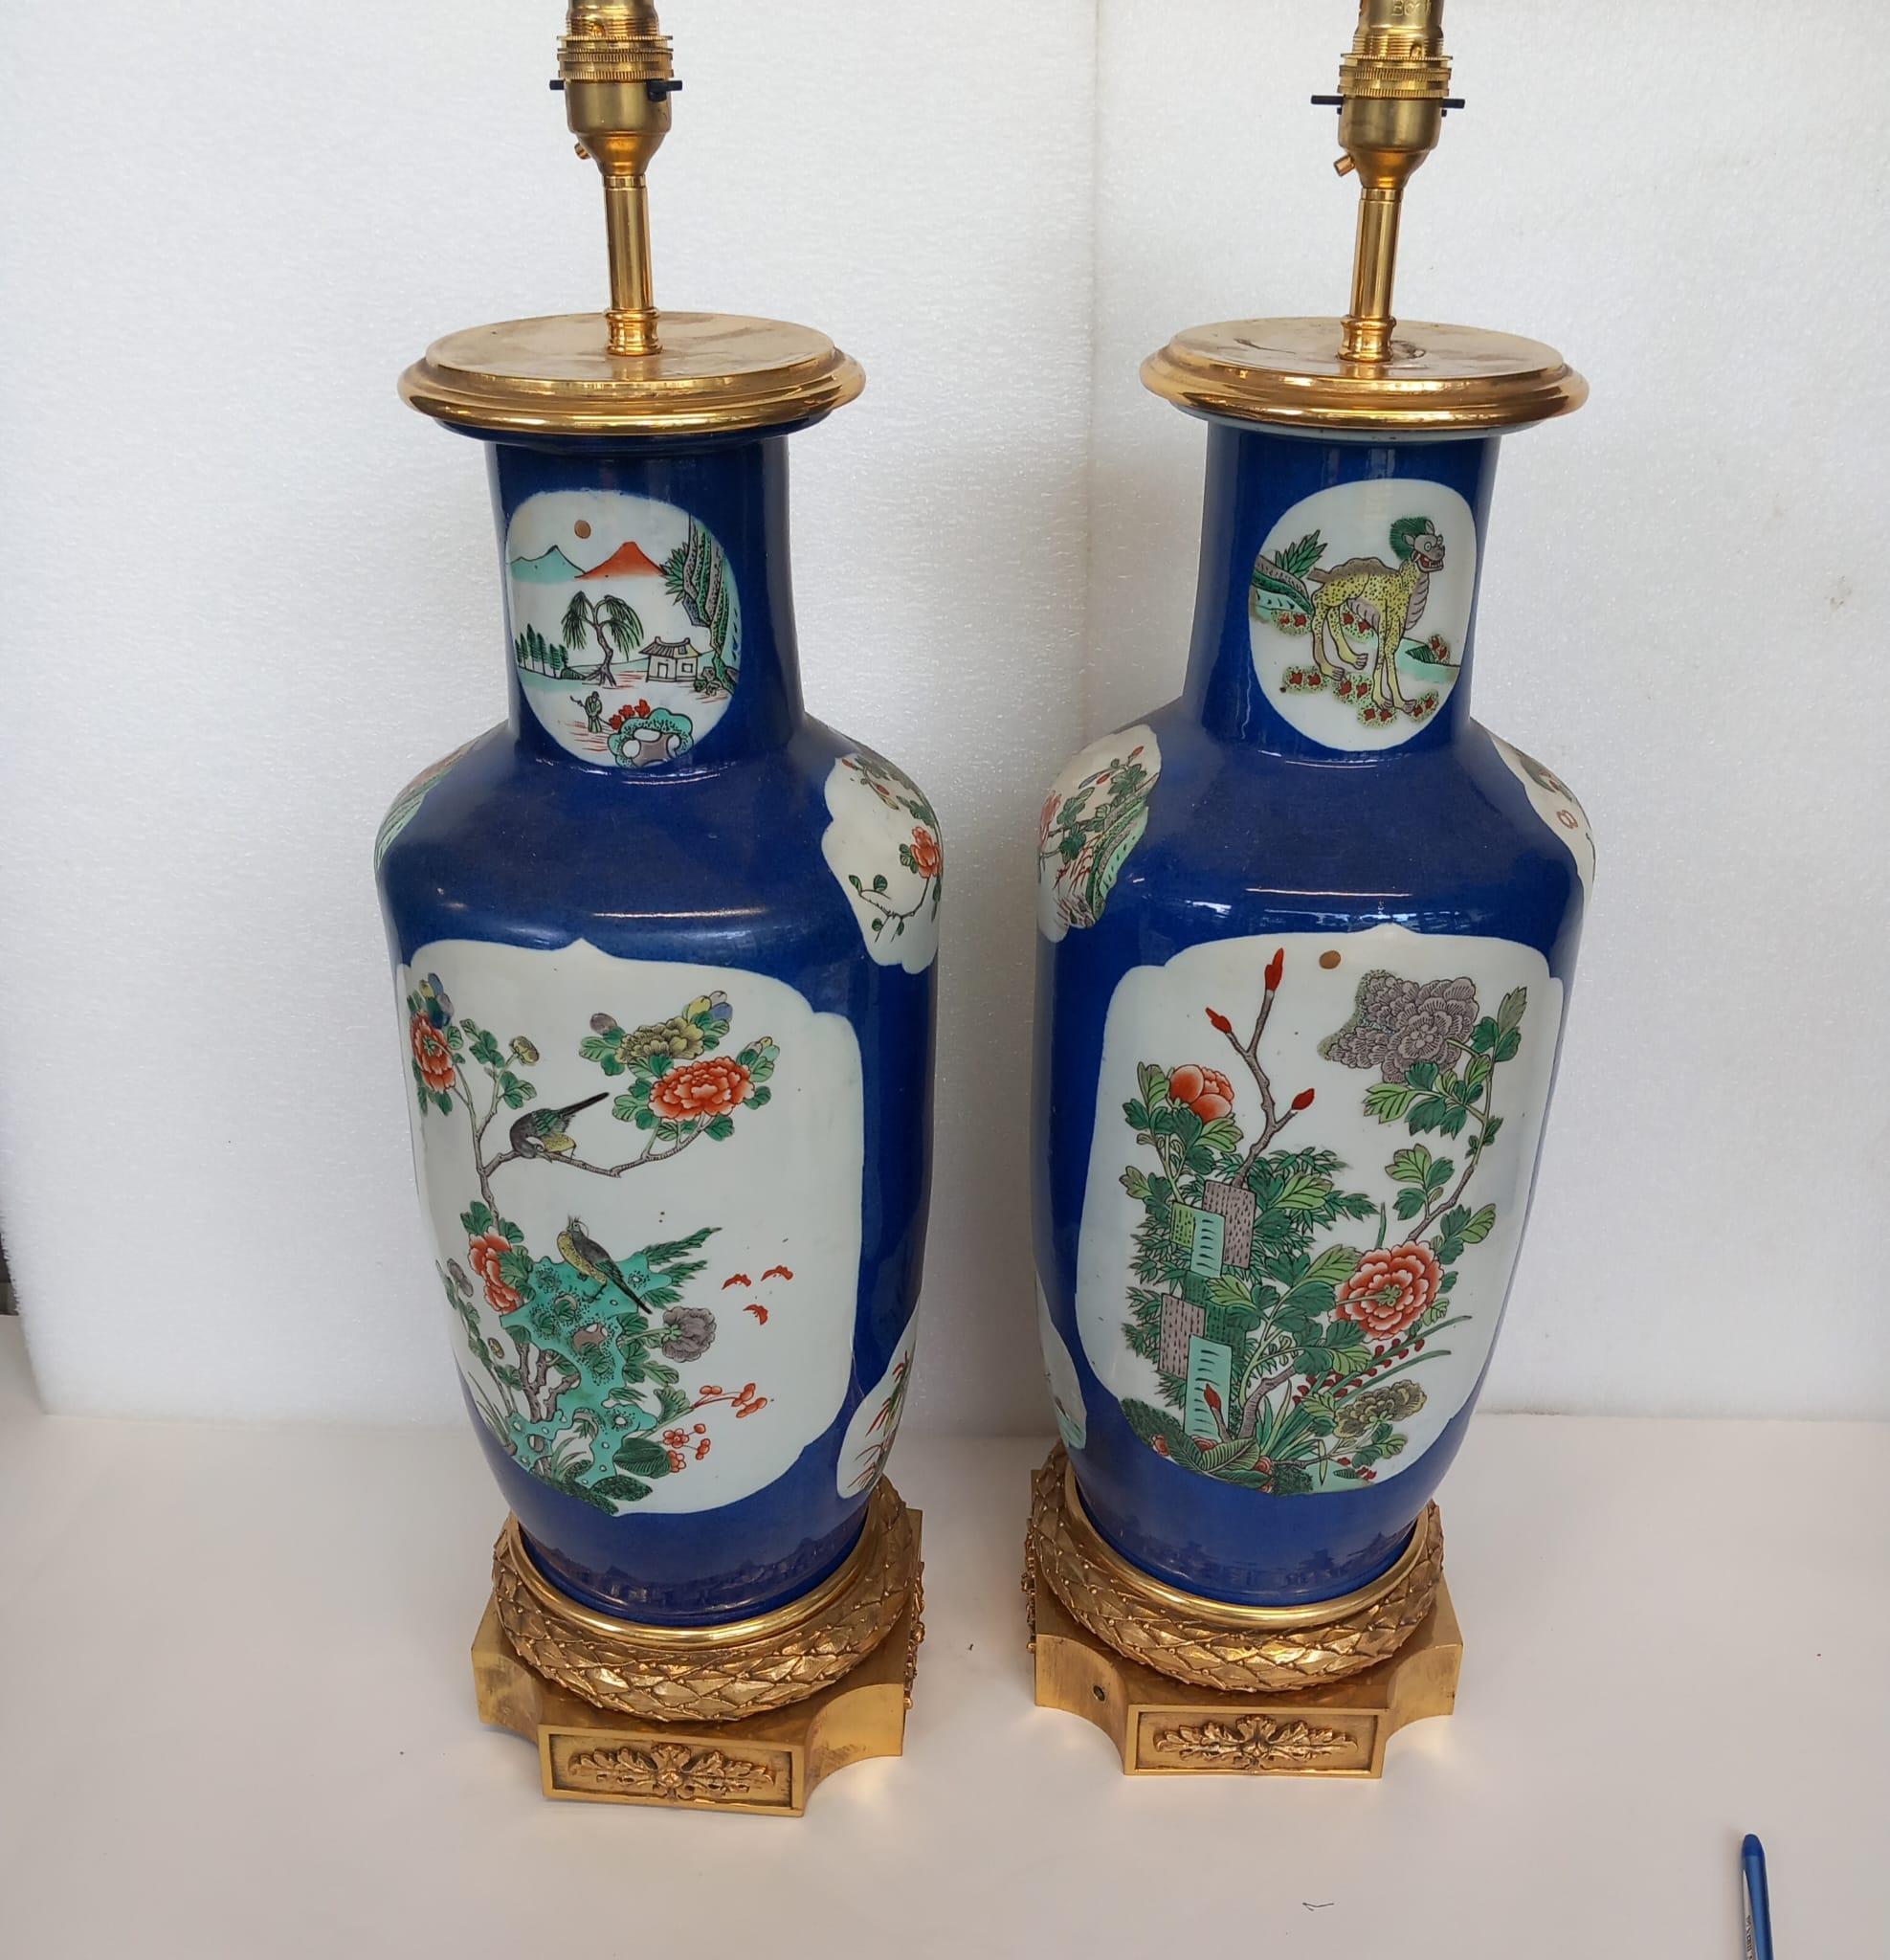 Pair of large Chinese blue vases , mid to late nineteenth century, converted into lamps, with enamel decorations of birds courting among flowering shrubs. The base of the vases resting on a gilt bronze stand, with laurel leaf designs. The tops have